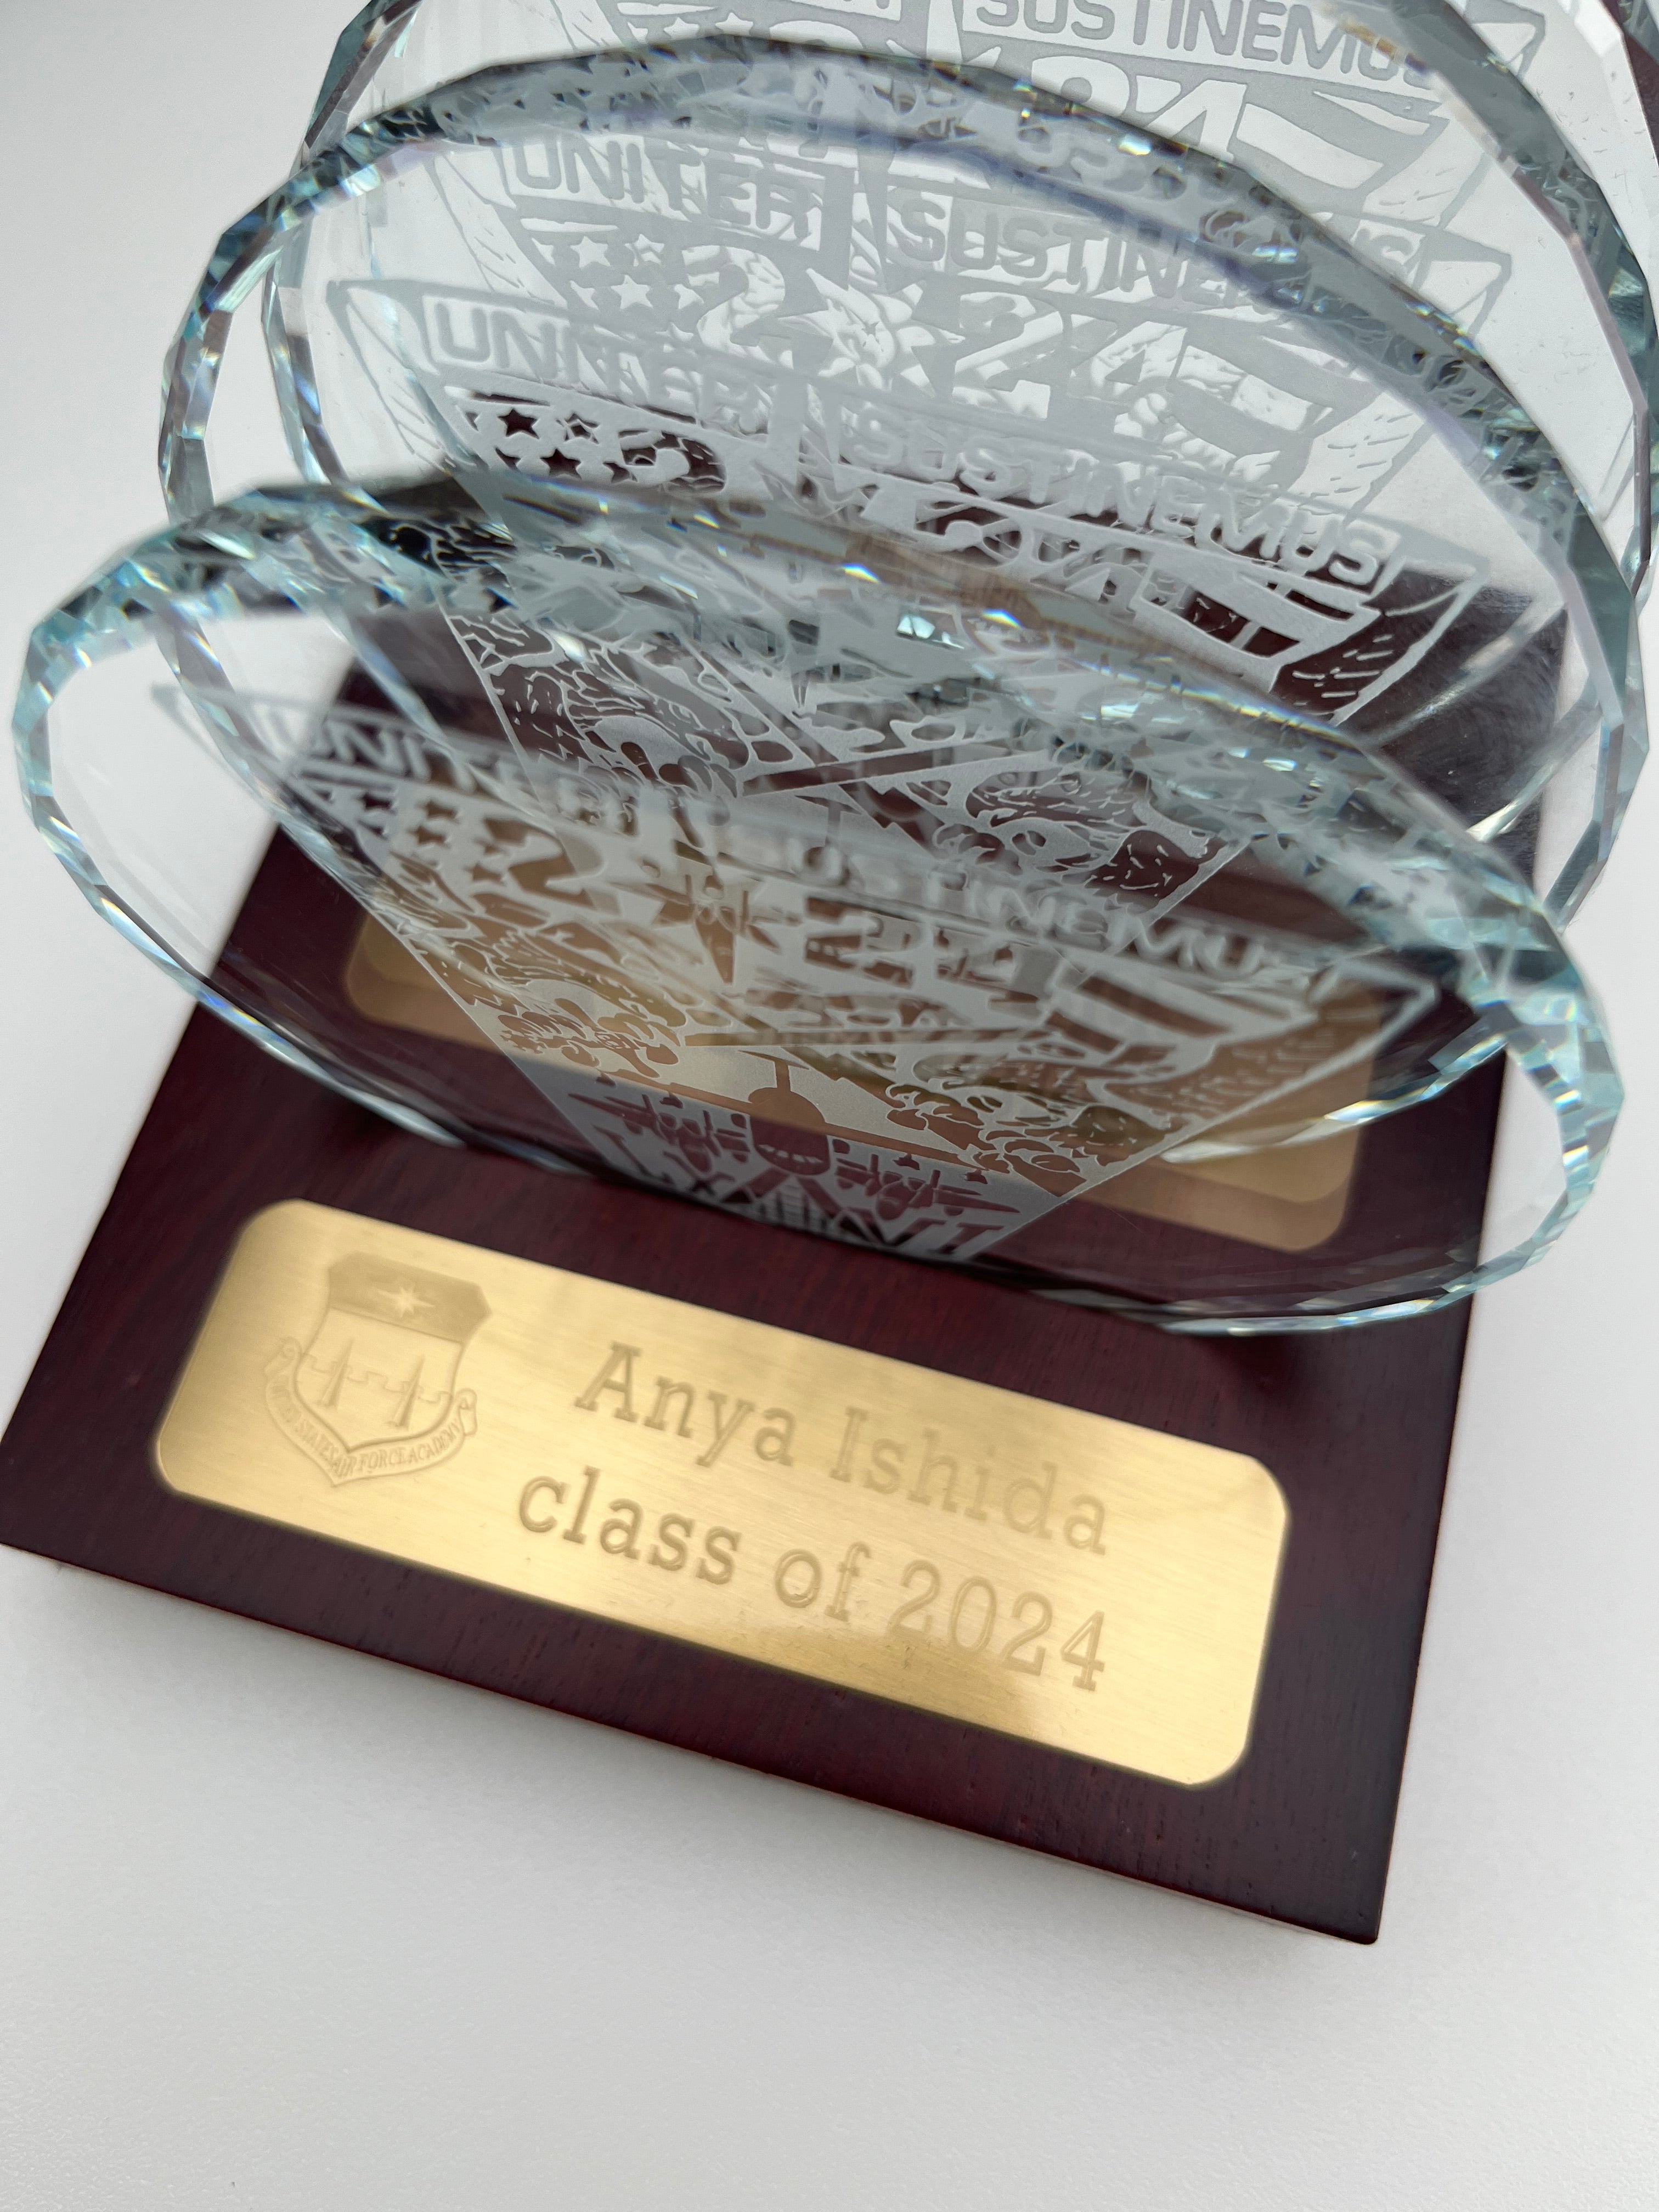 USAFA Custom Faceted Edge Sand Carved Crystal Coasters in Wood Base with Brass Plate - class of 2024